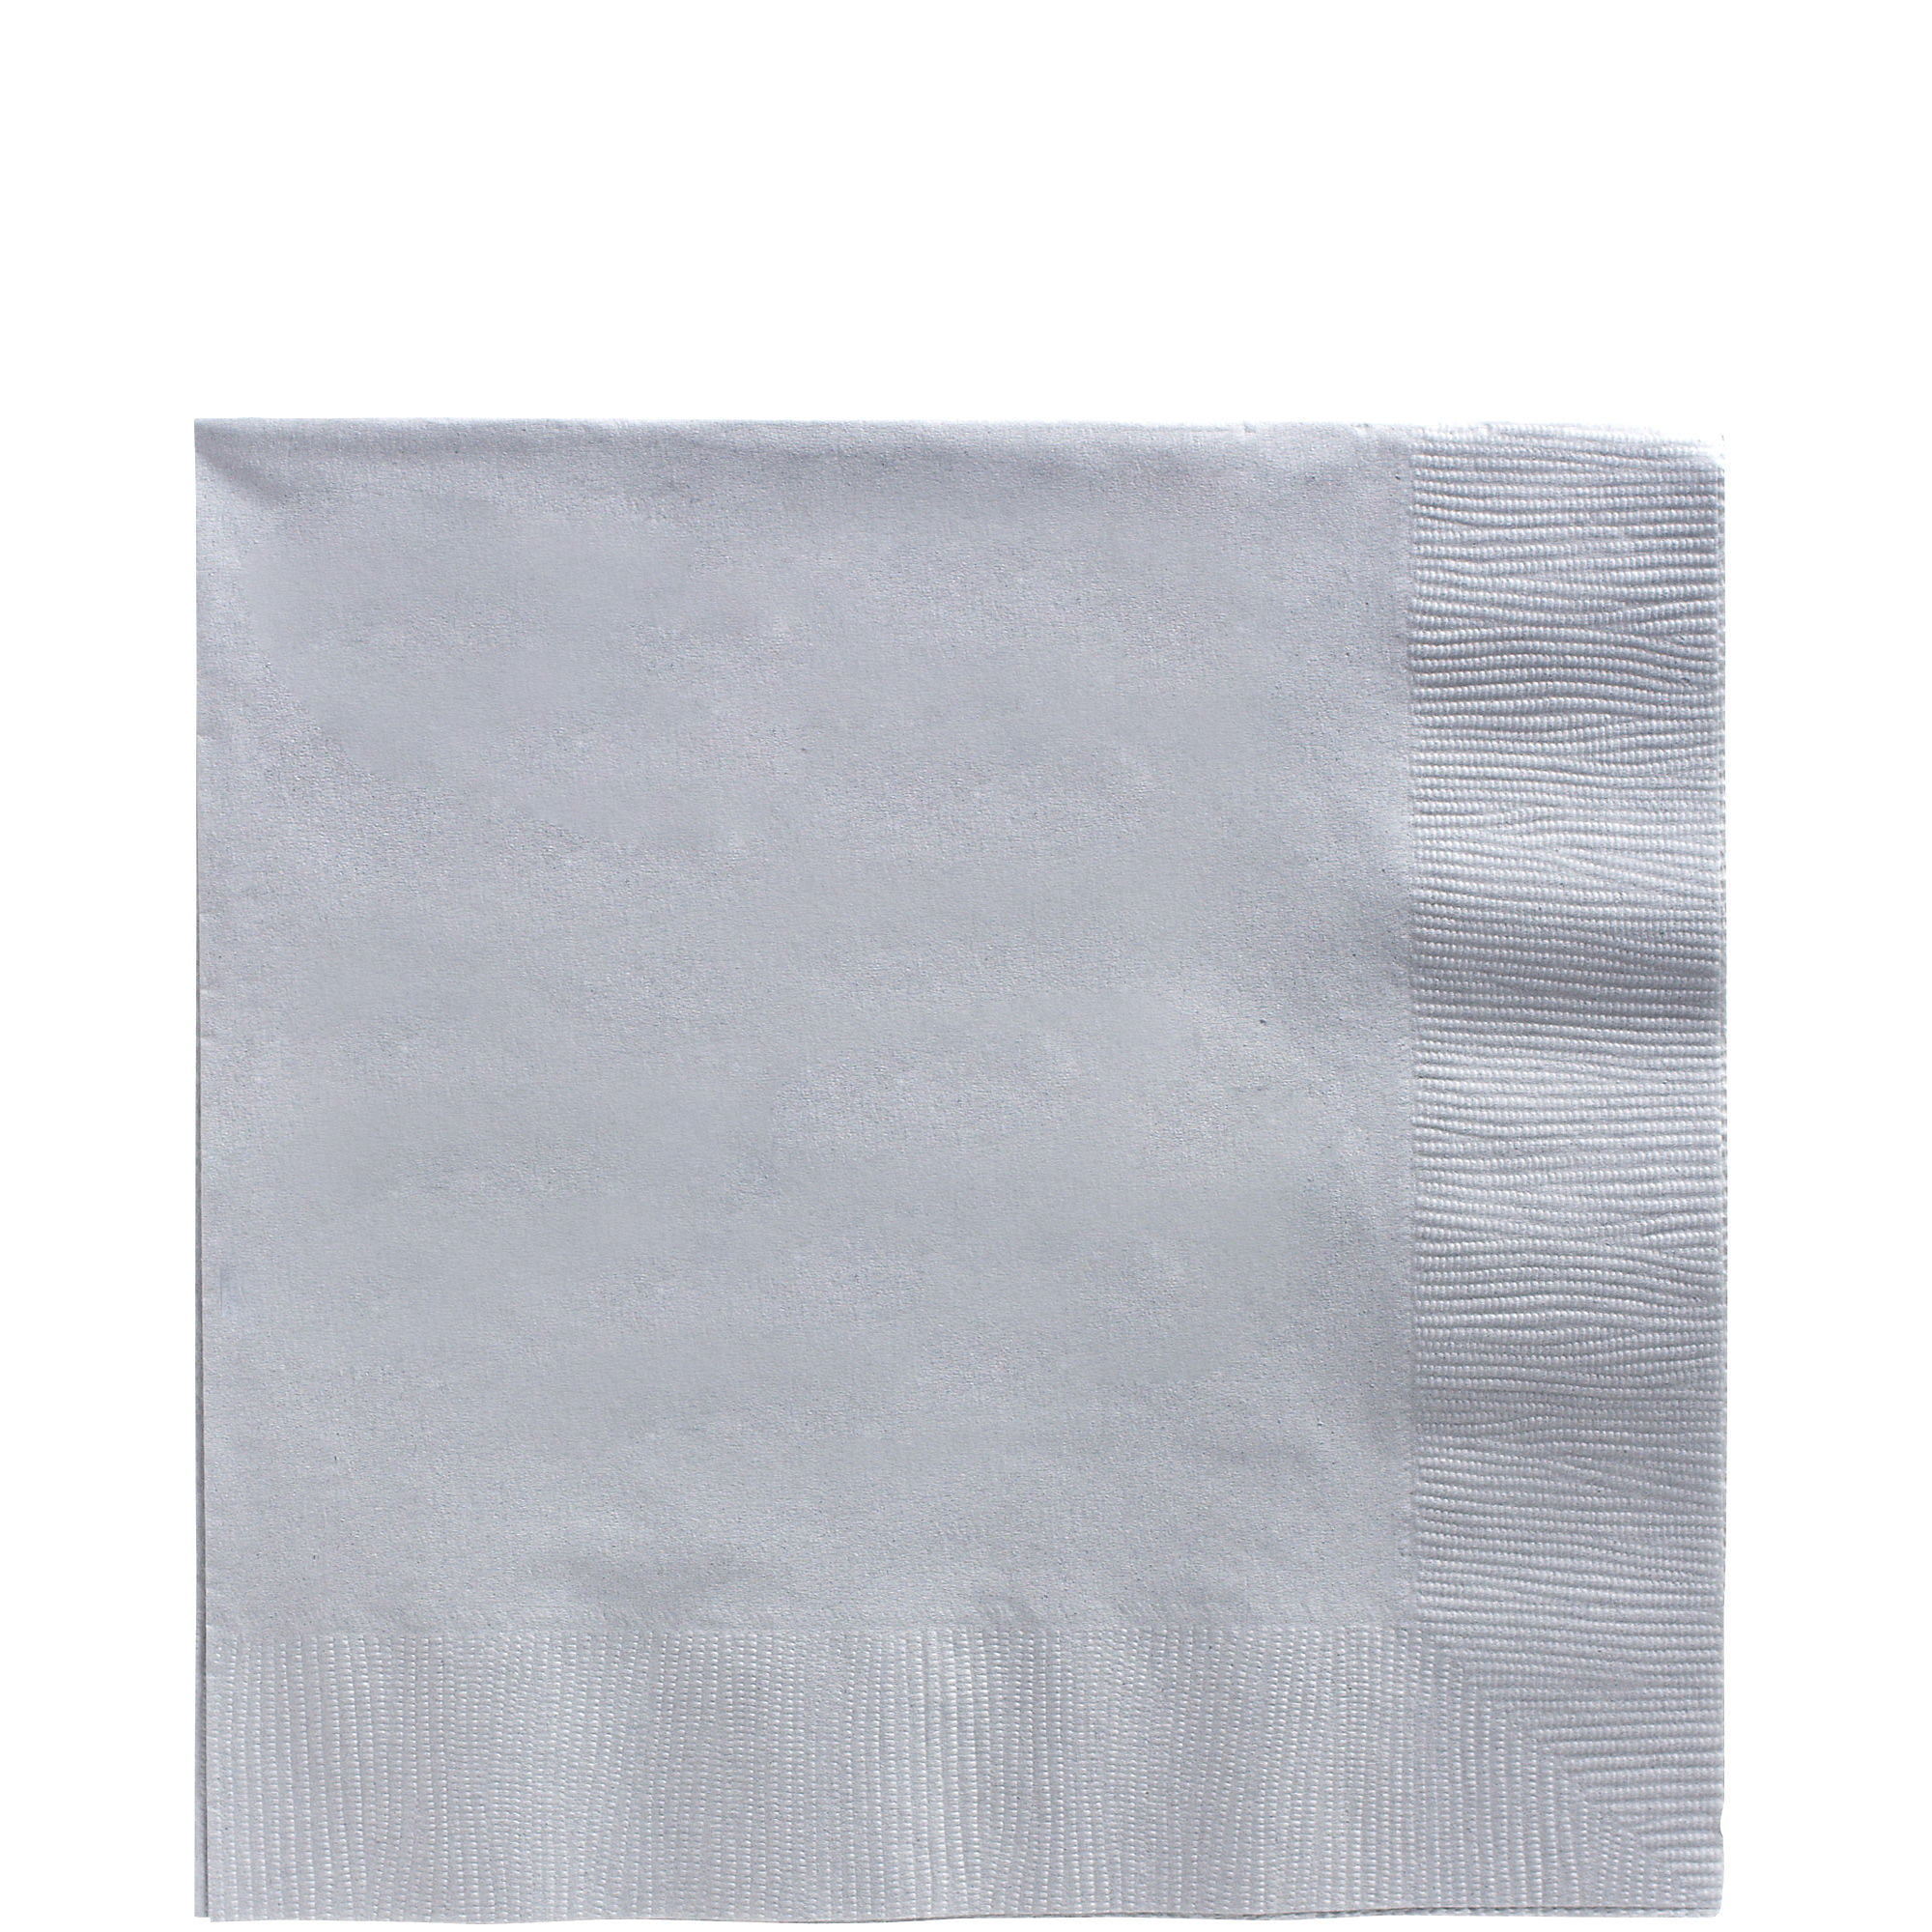 Lavender Big Party Pack Luncheon Napkins Party Supply Amscan 610013.04 Pack of 125